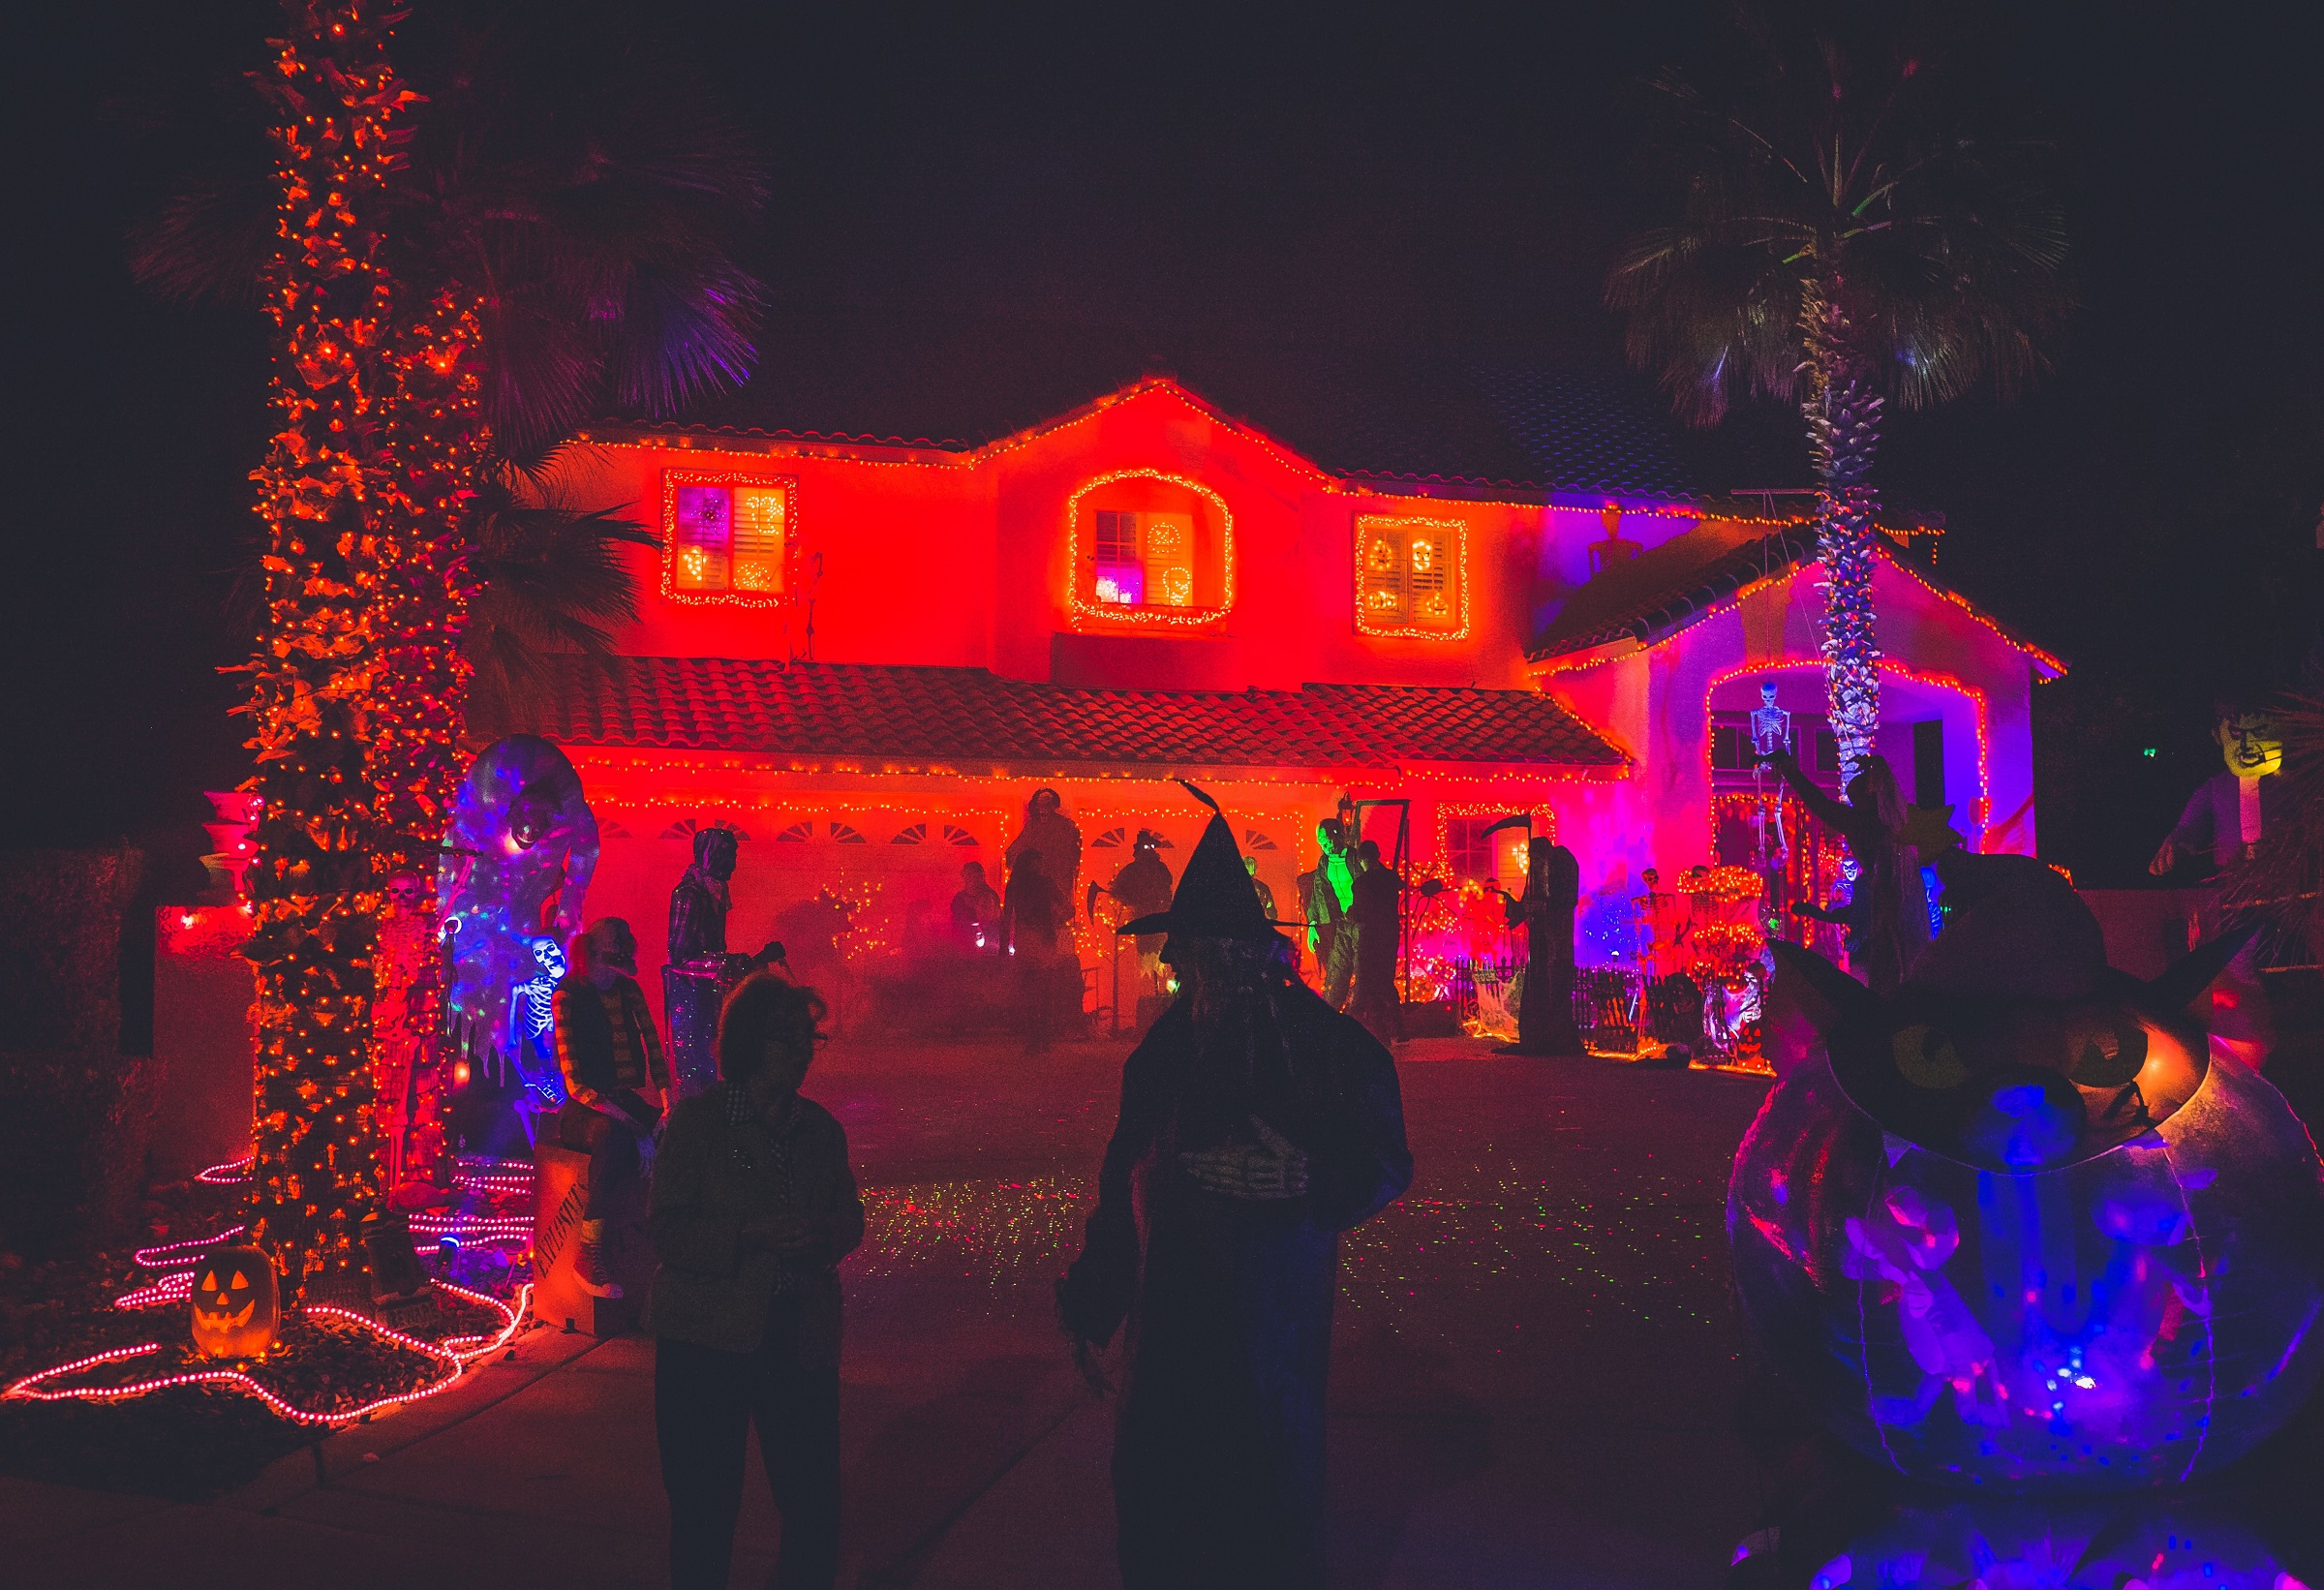 Trick-or-treaters outside a house decorated for Halloween